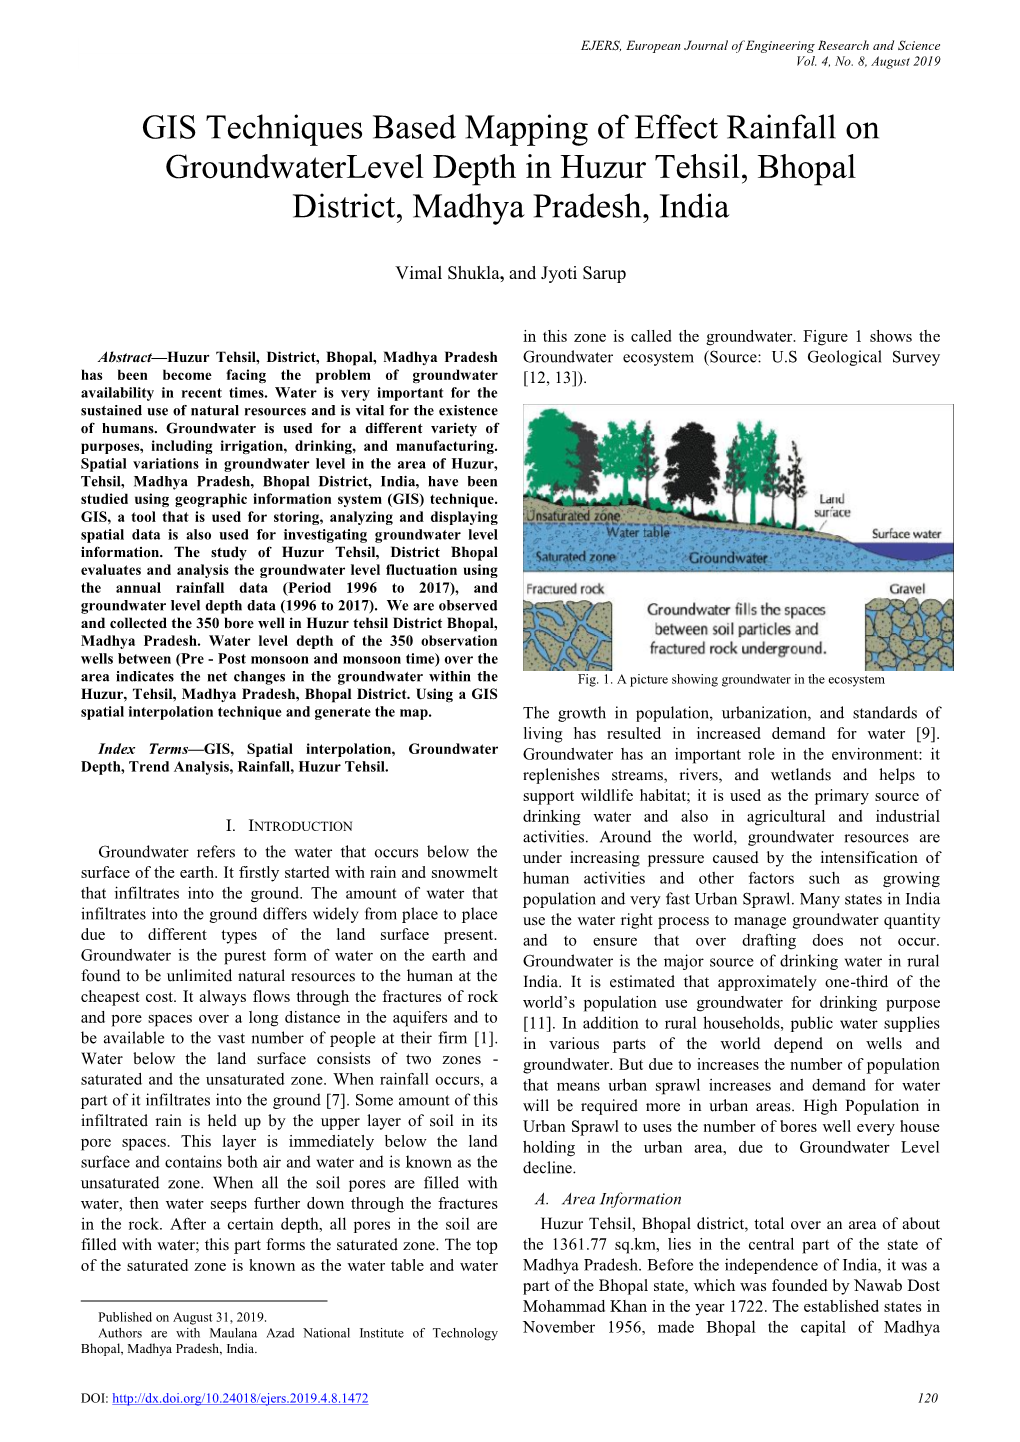 GIS Techniques Based Mapping of Effect Rainfall on Groundwaterlevel Depth in Huzur Tehsil, Bhopal District, Madhya Pradesh, India